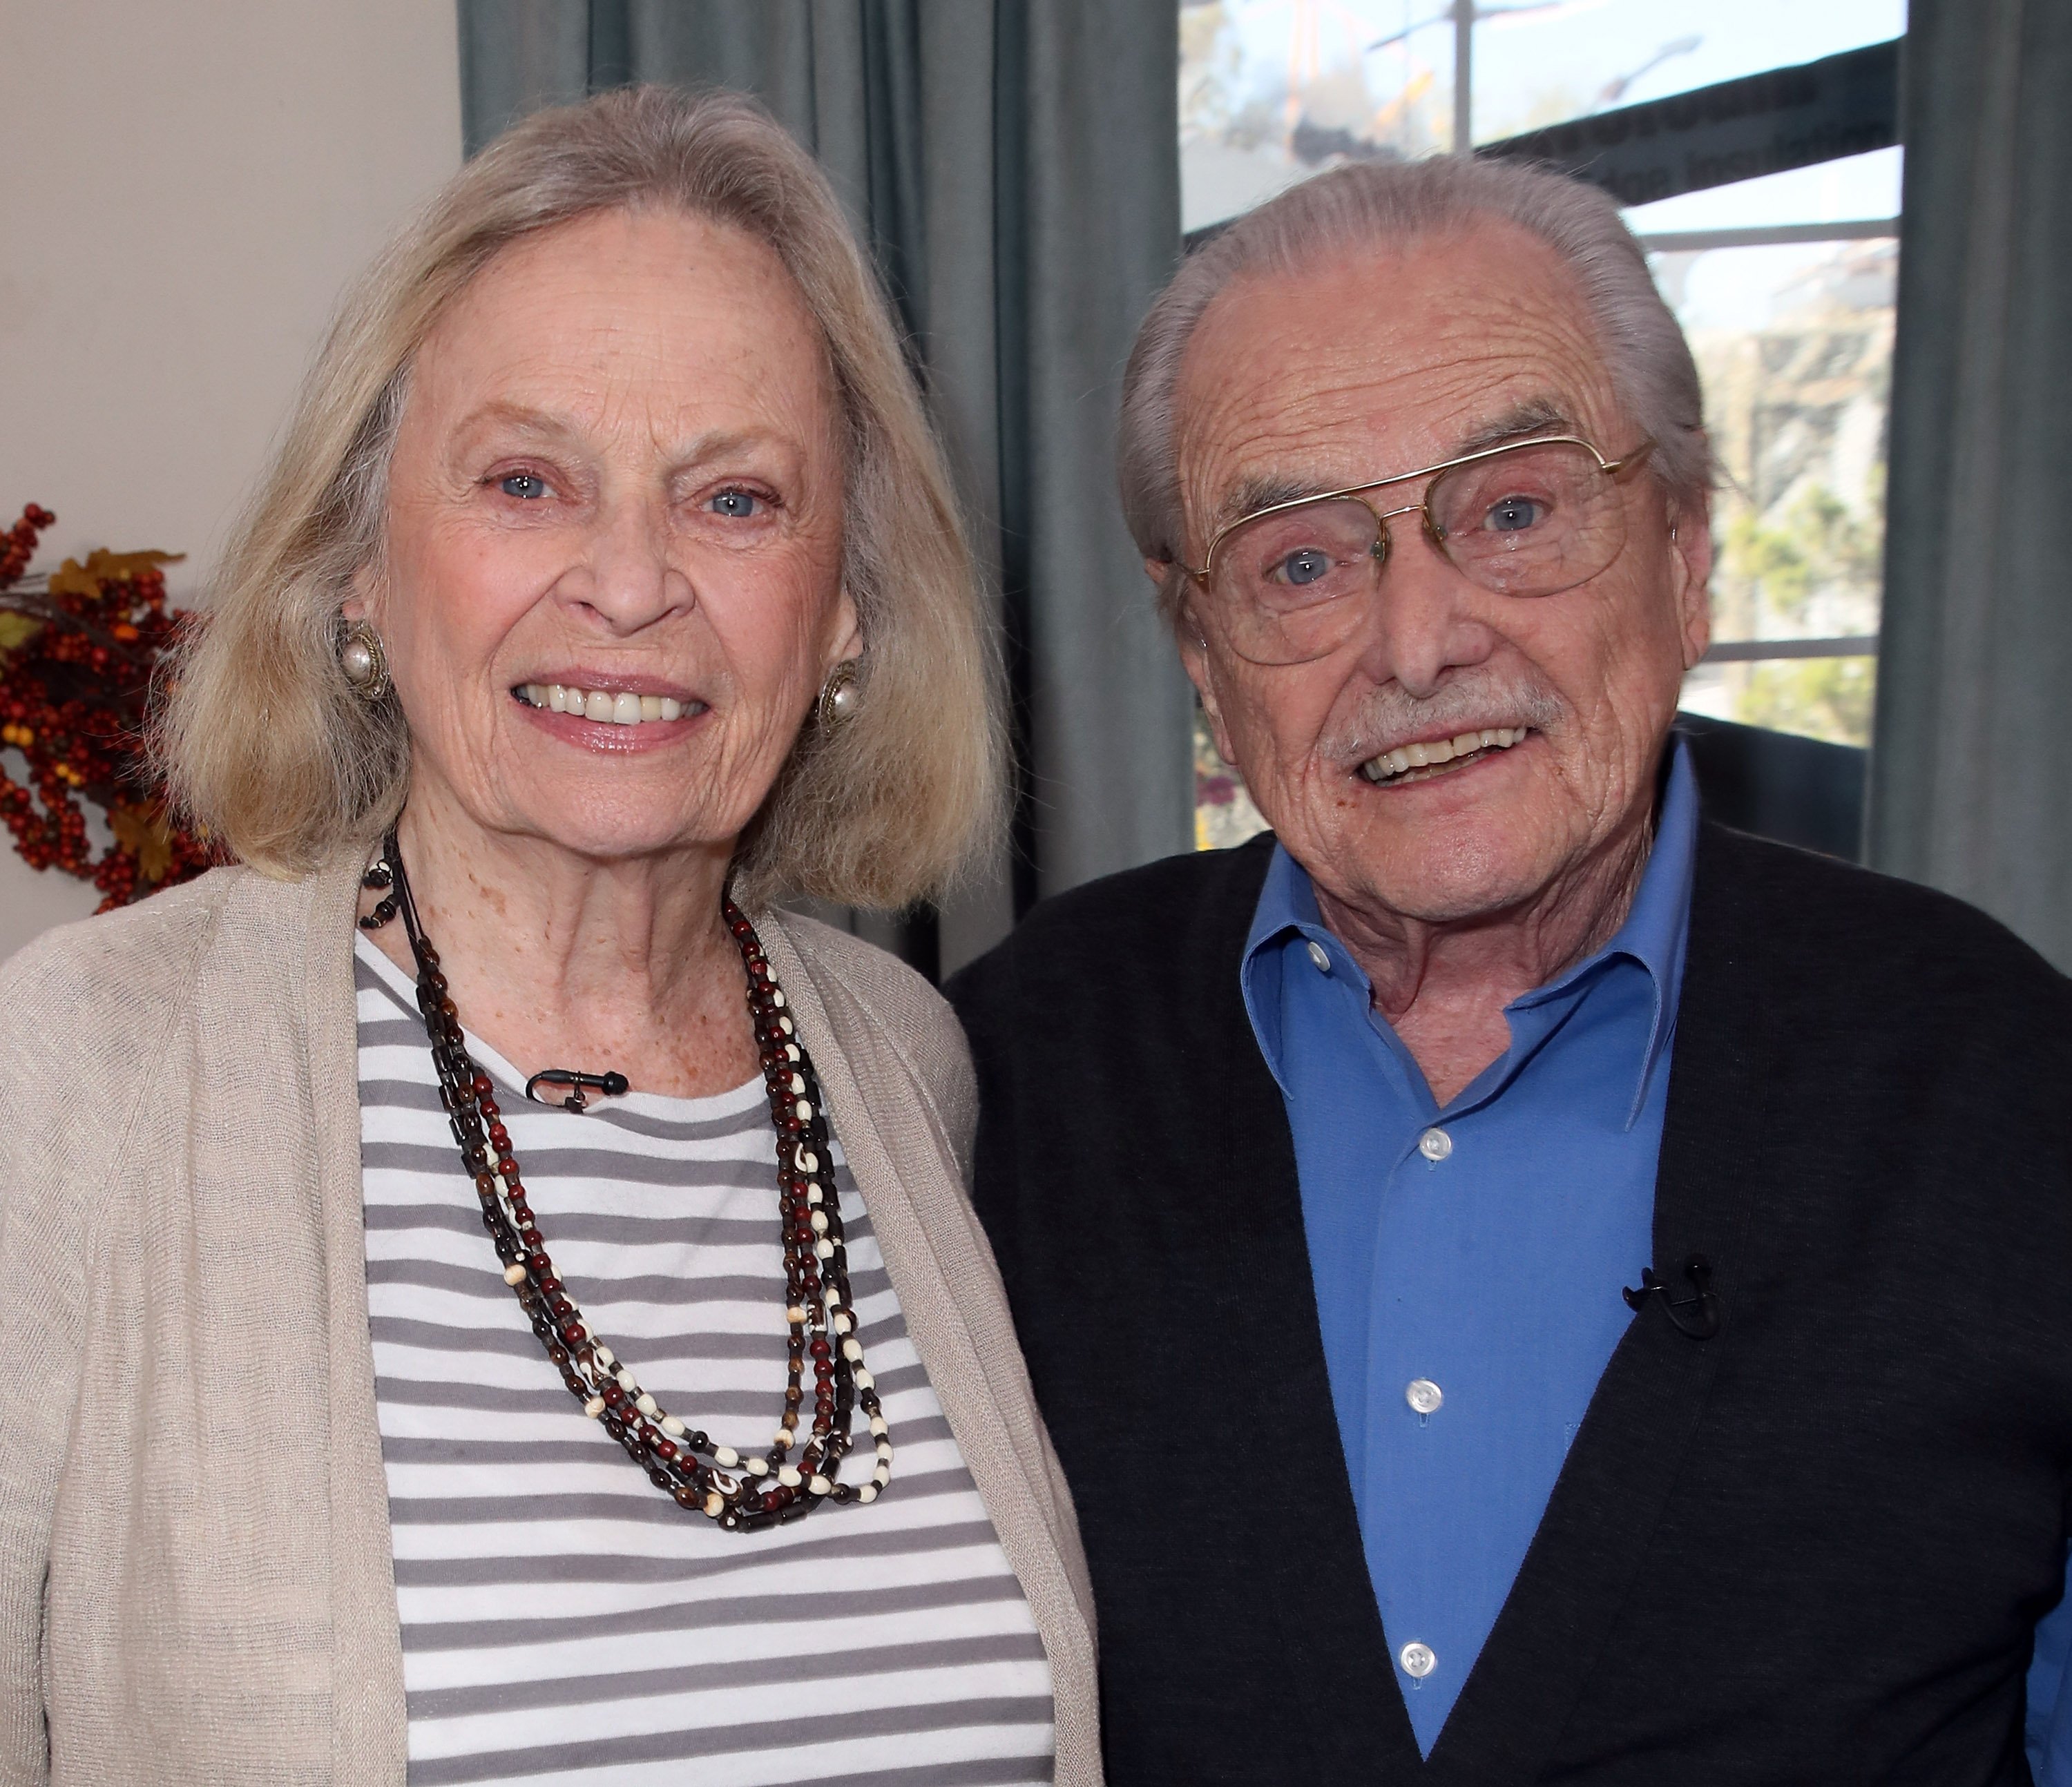 Actress Bonnie Bartlett (L) and husband actor William Daniels visit Hallmark's "Home & Family" at Universal Studios Hollywood on October 25, 2017 in Universal City, California | Source: Getty Images